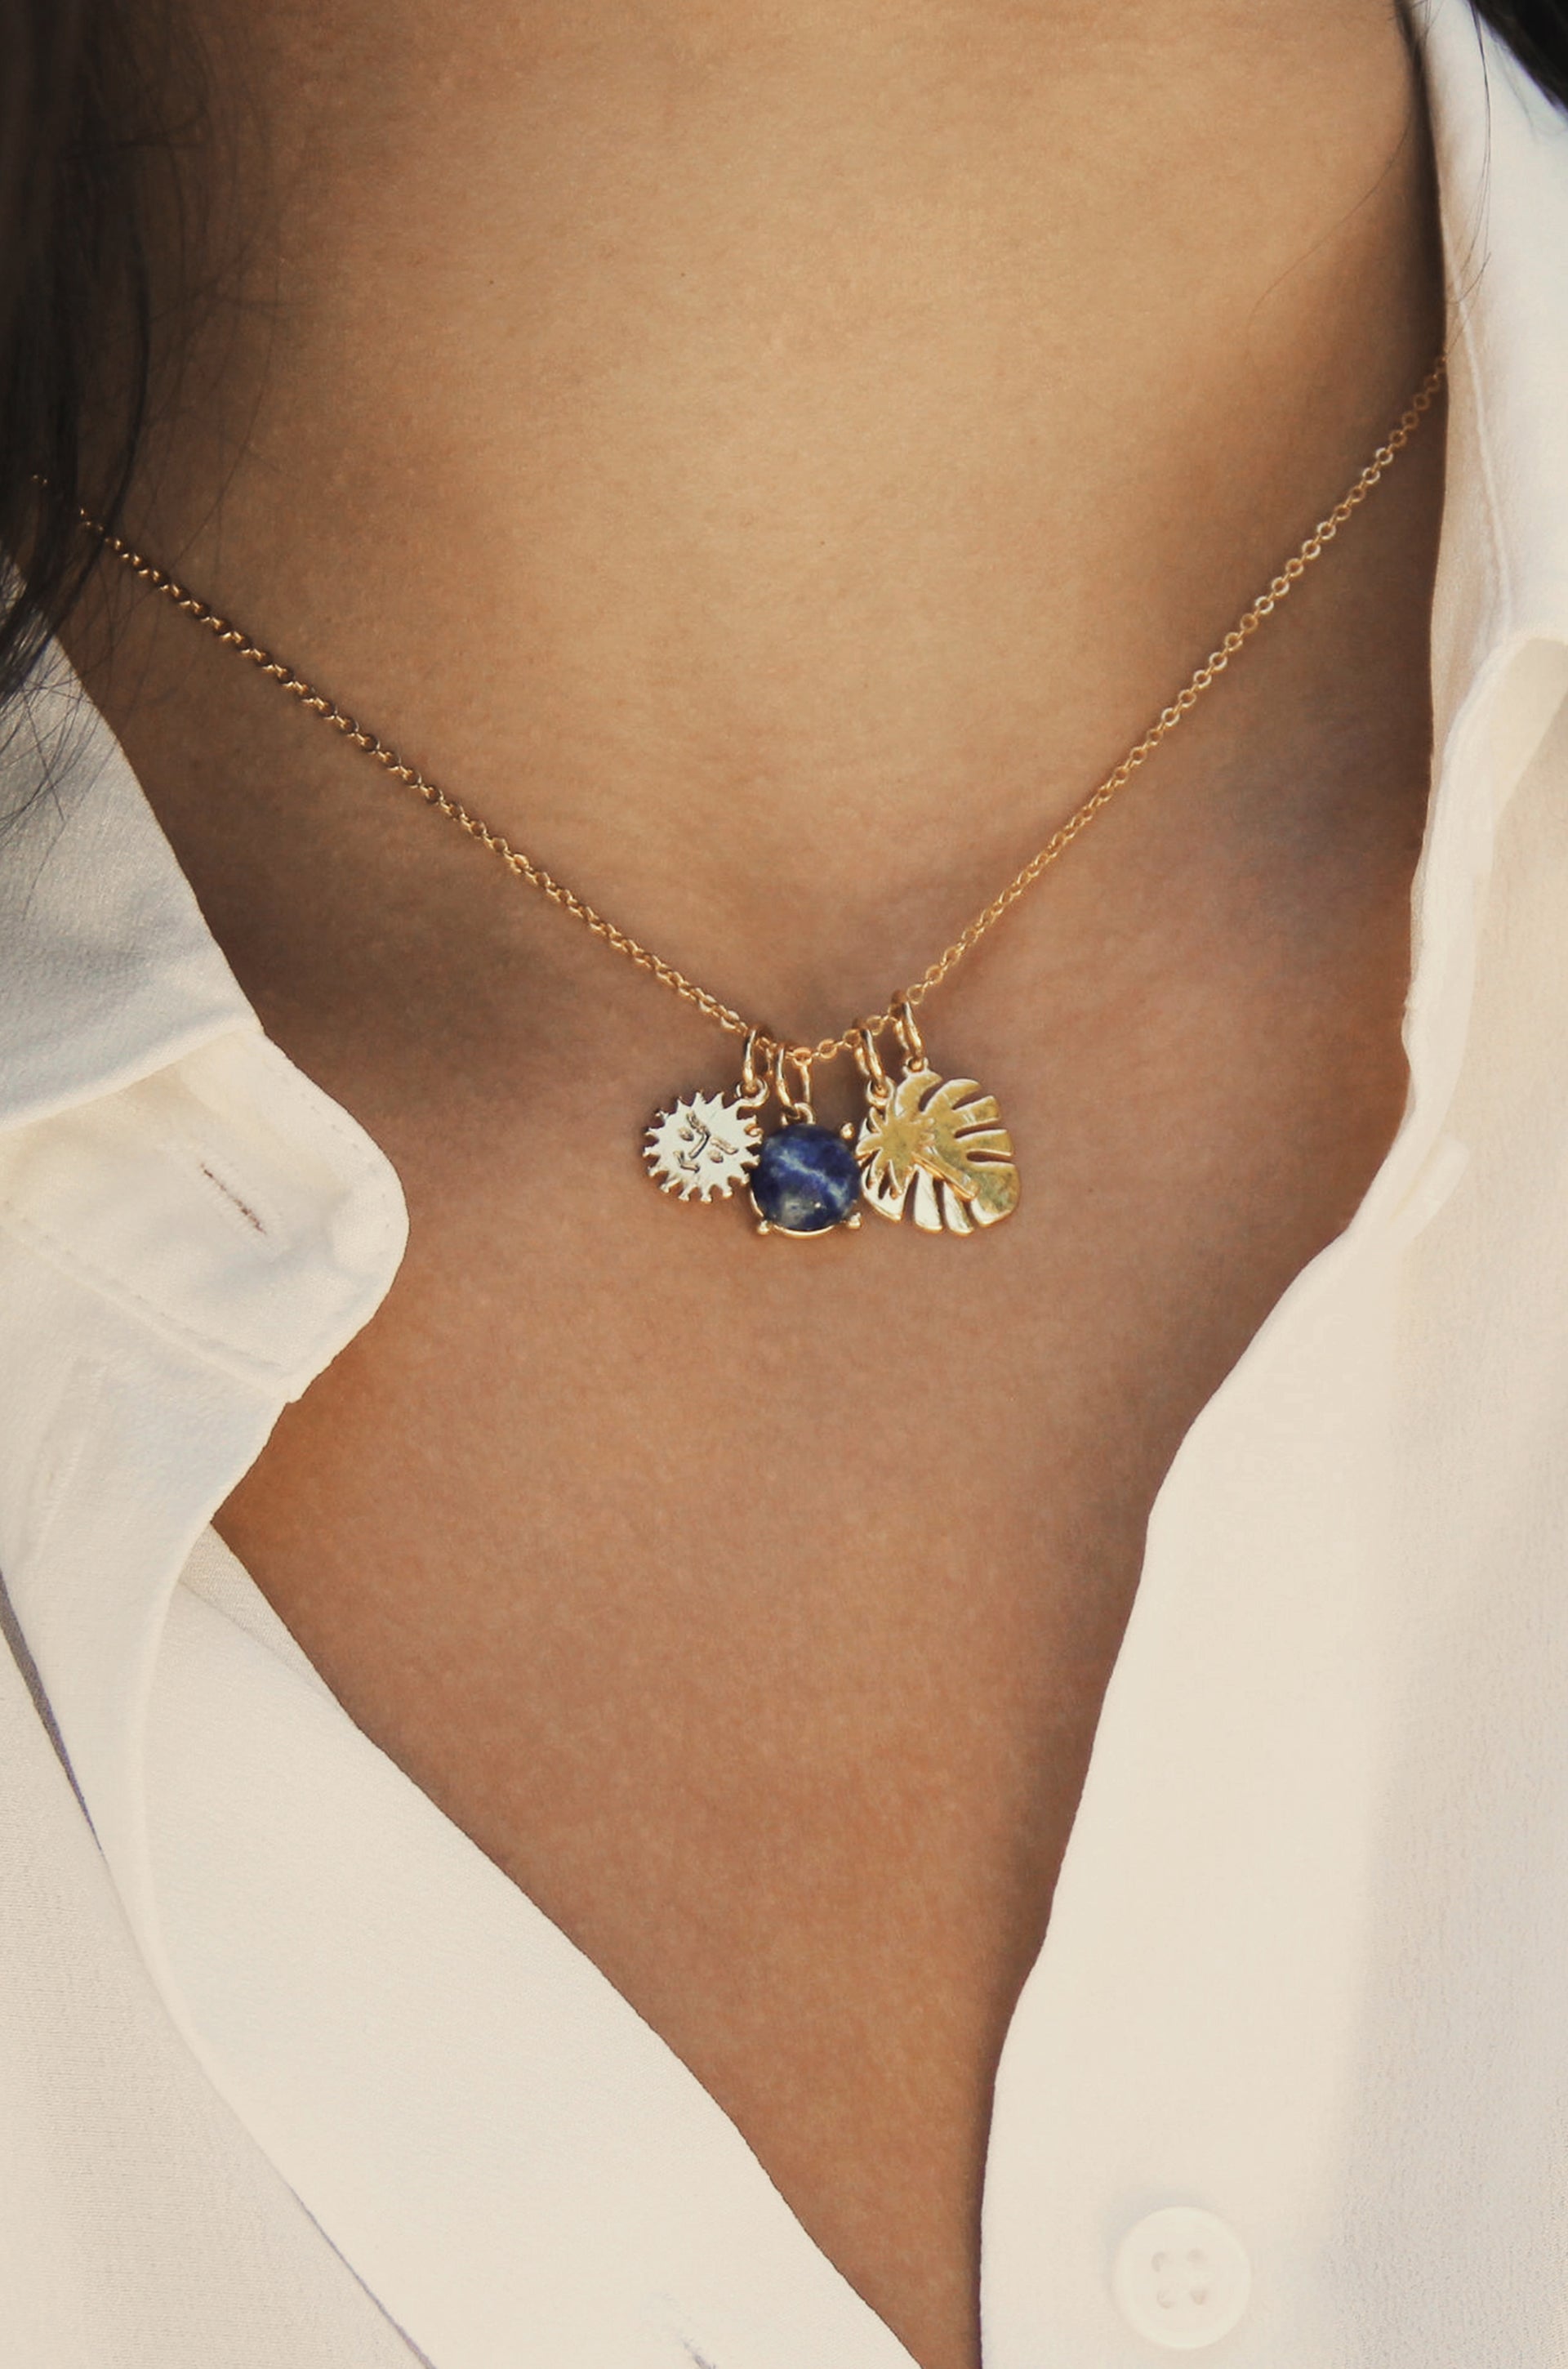 Tropical Getaway 18k Gold Plated Interchangeable Charm Necklace shown on a model  